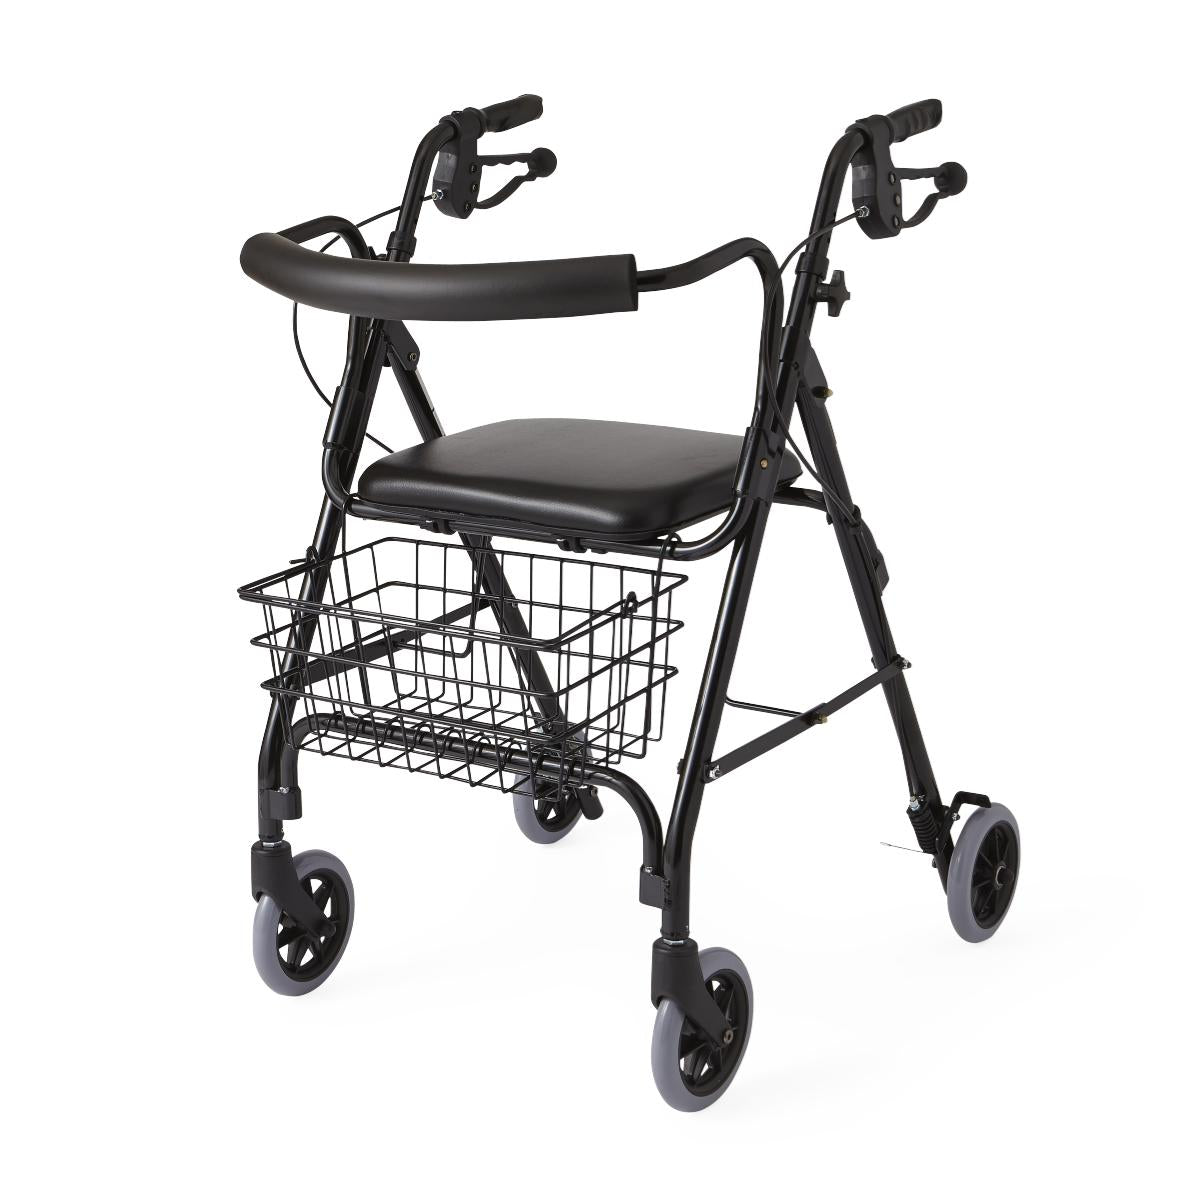 1 Each-Case / Black / 6.000 IN Patient Safety & Mobility - MEDLINE - Wasatch Medical Supply